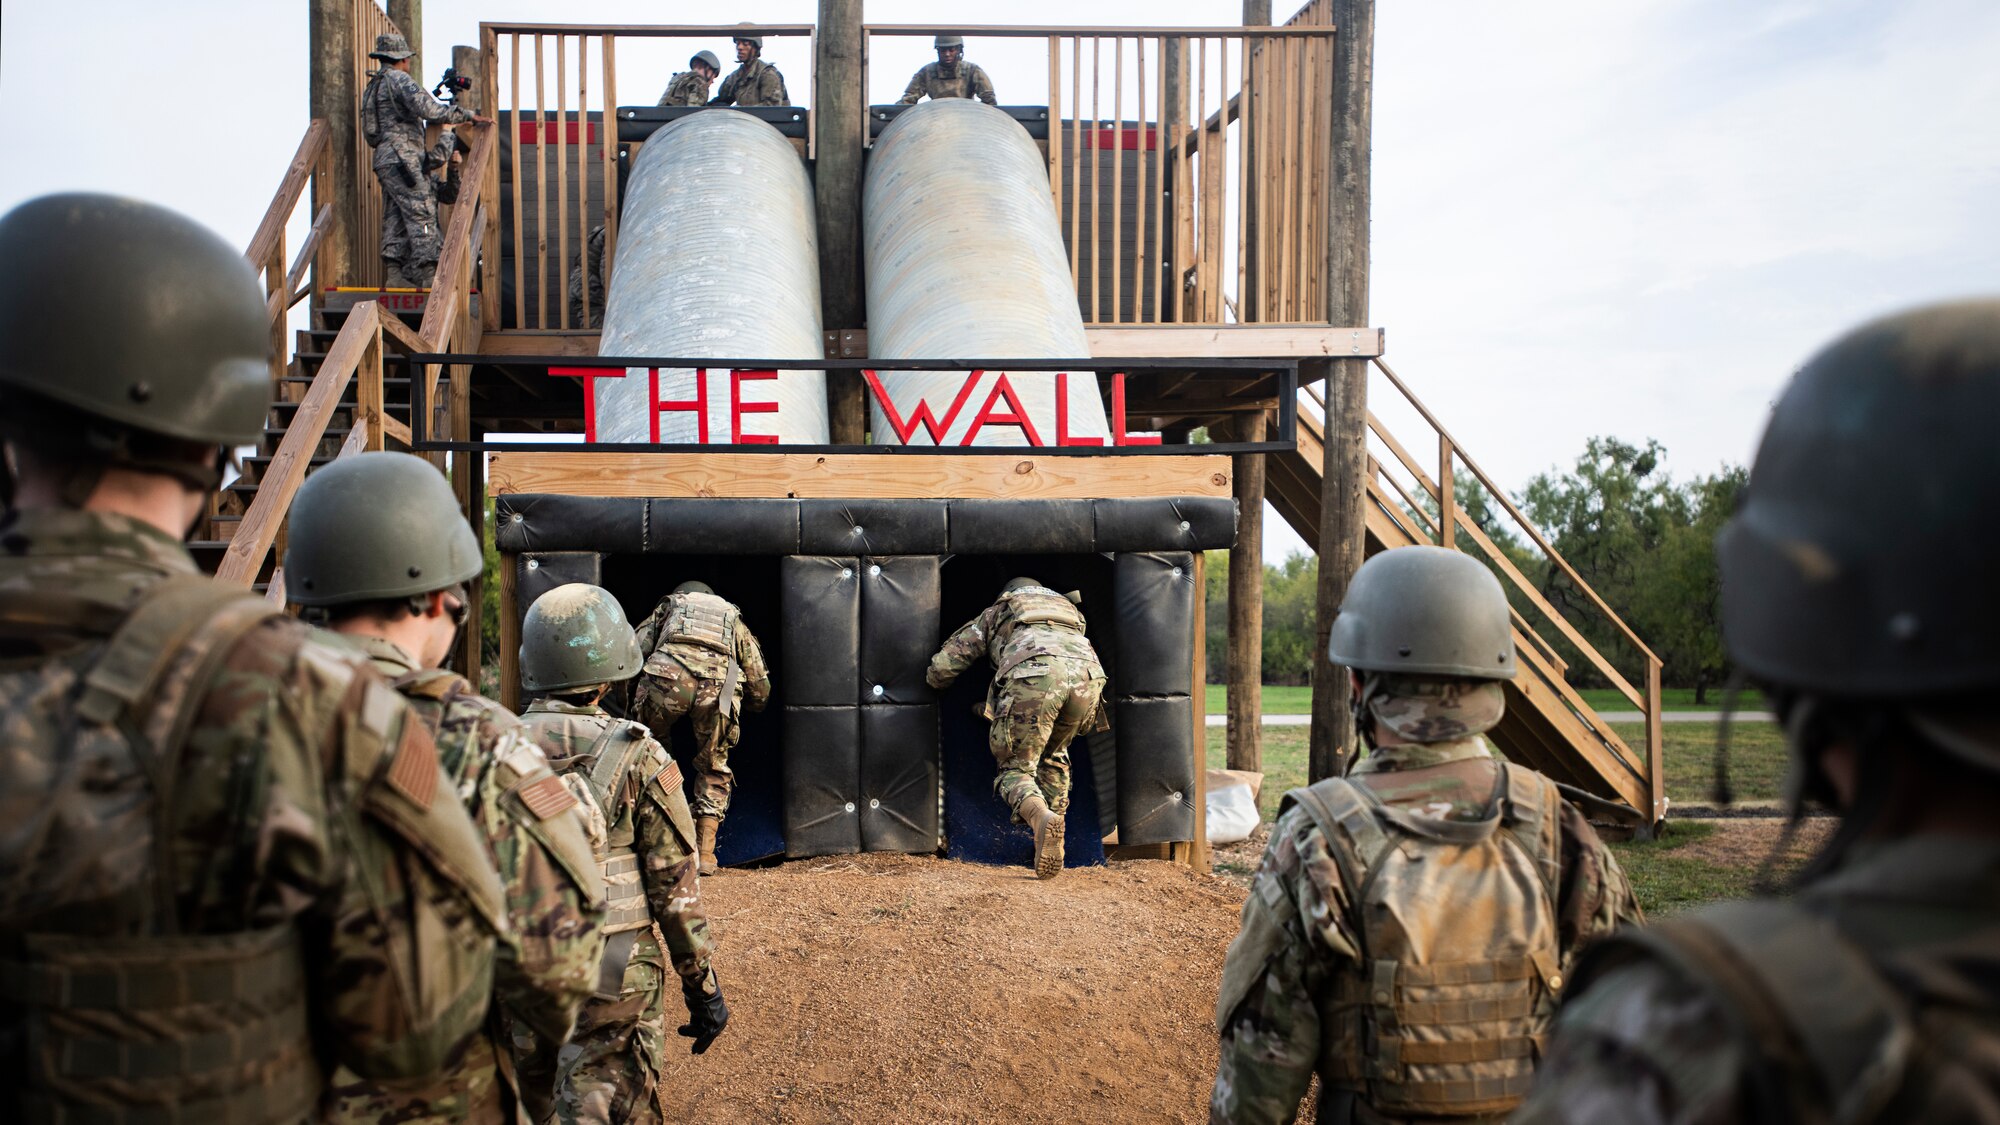 Basic military trainees begin an obstacle known as “The Wall”